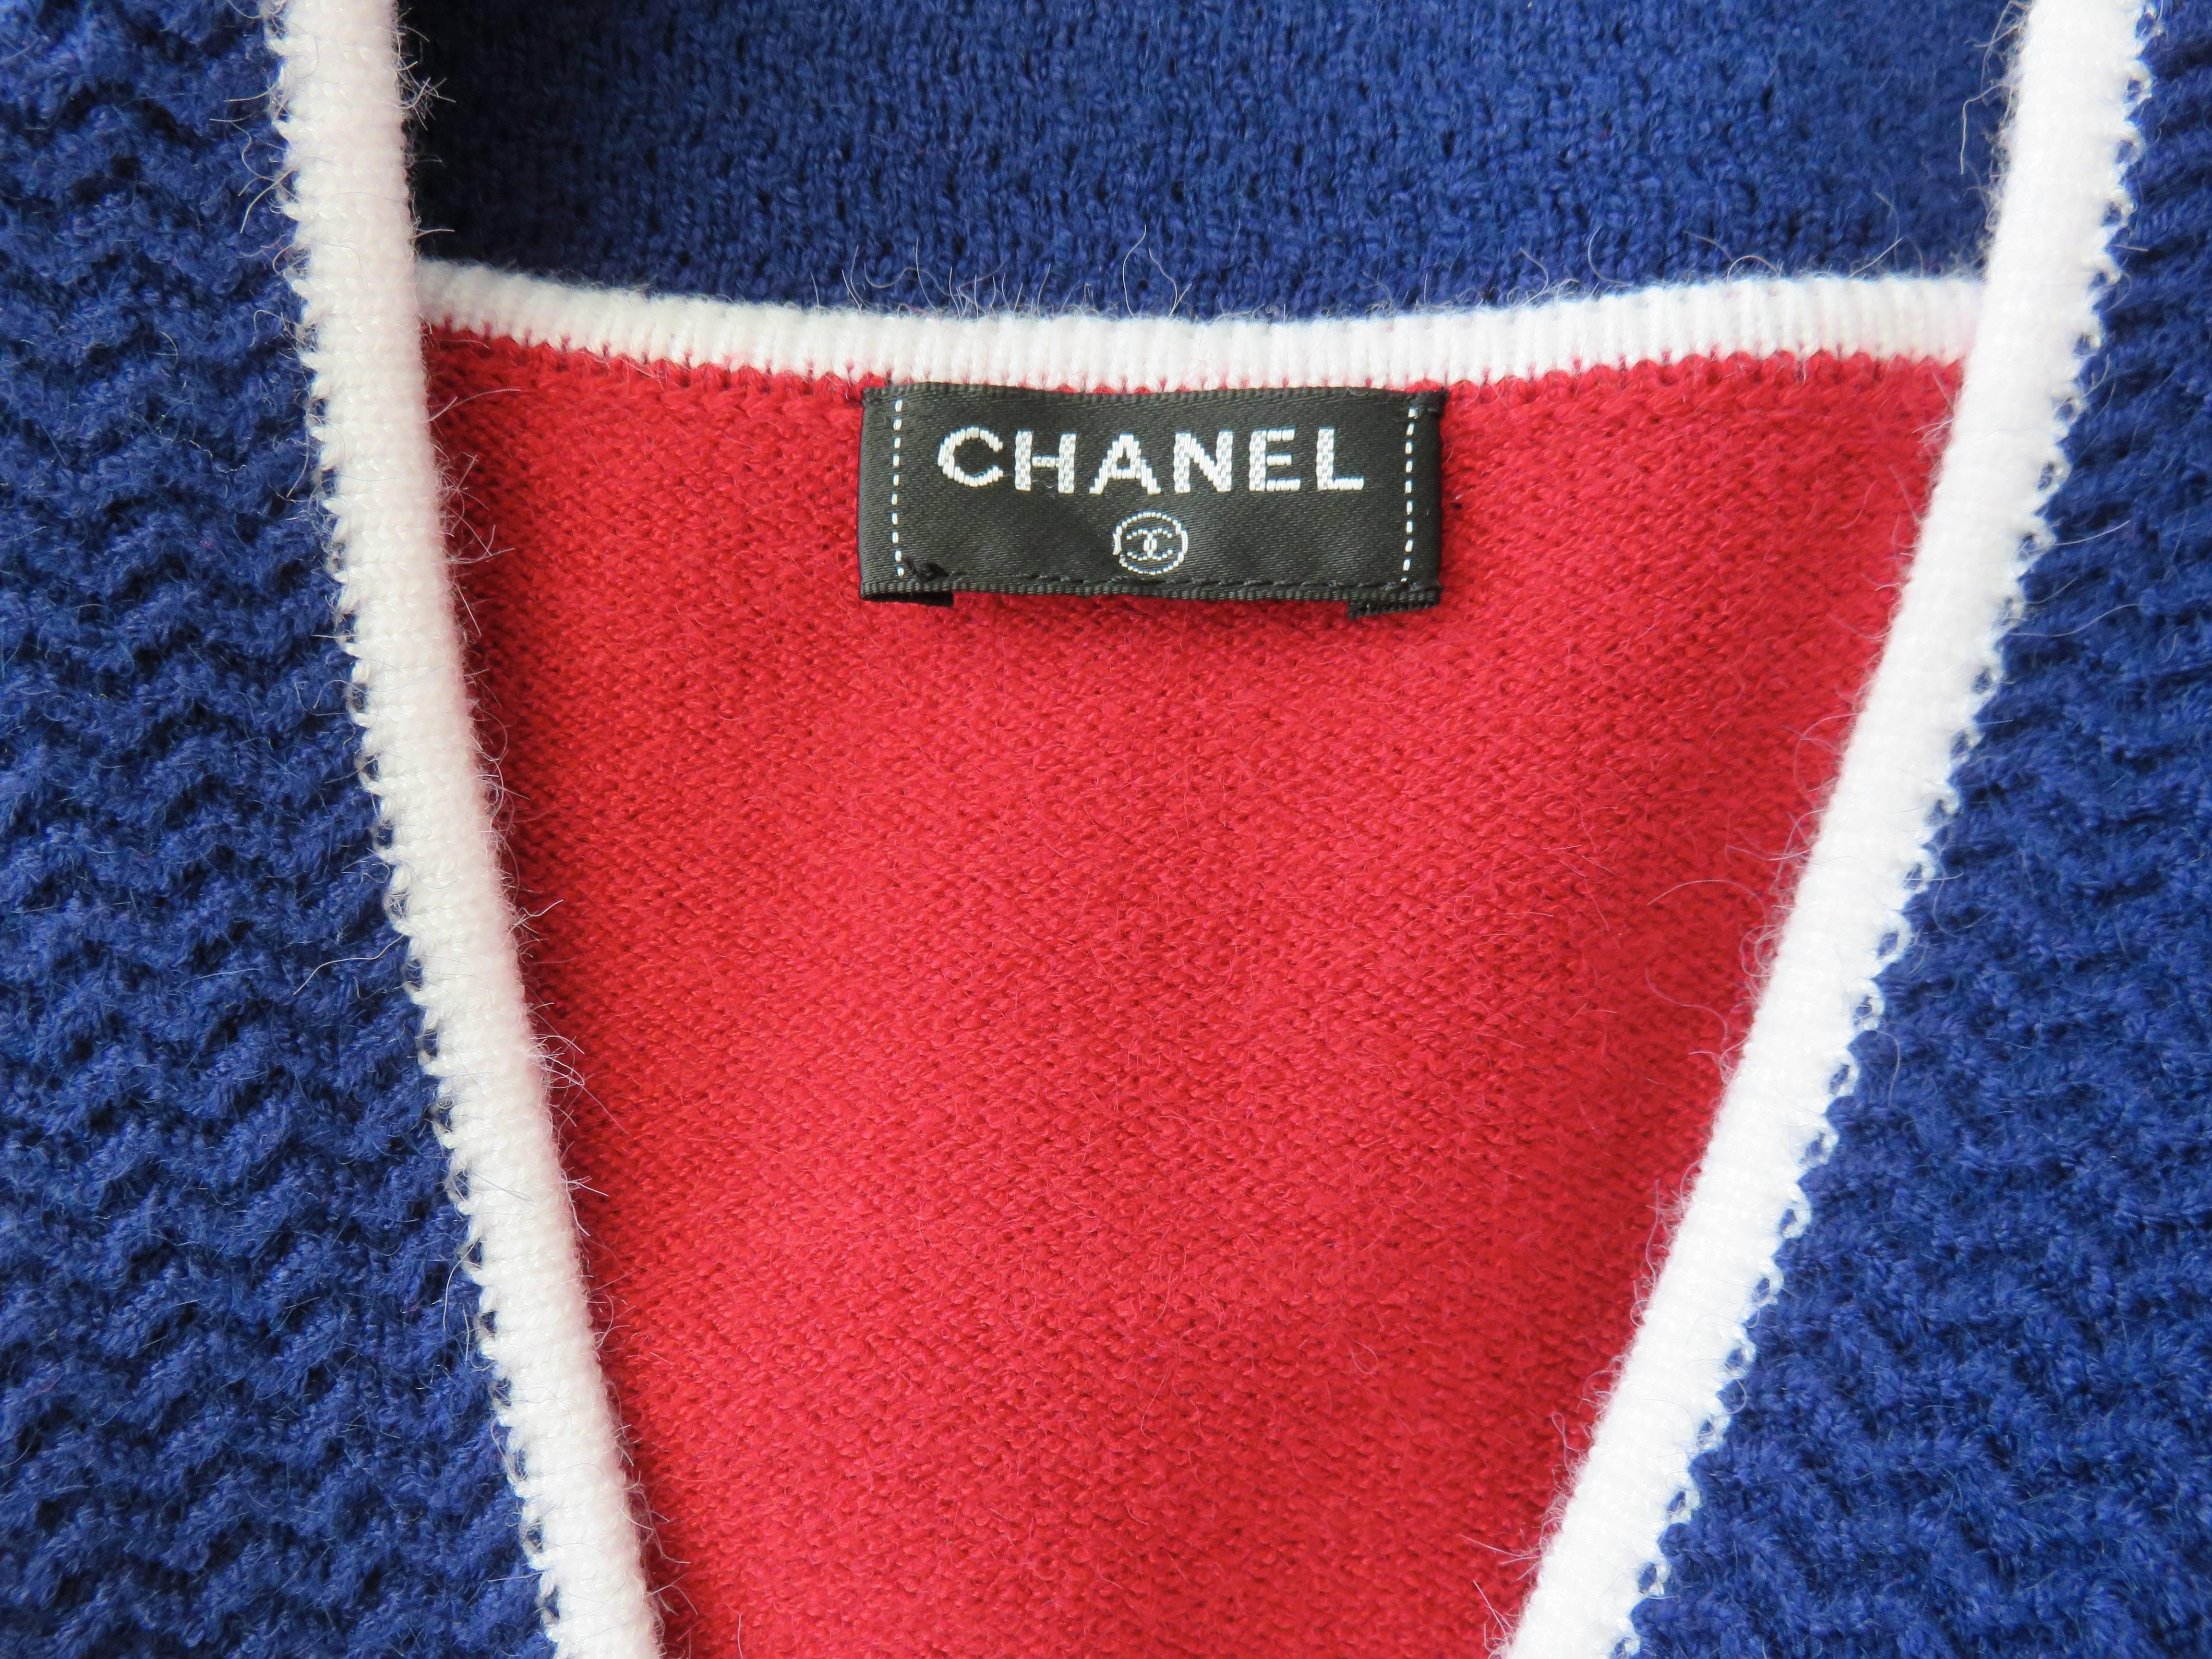 Women's CHANEL PARIS Pure cashmere cardigan sweater - worn once For Sale